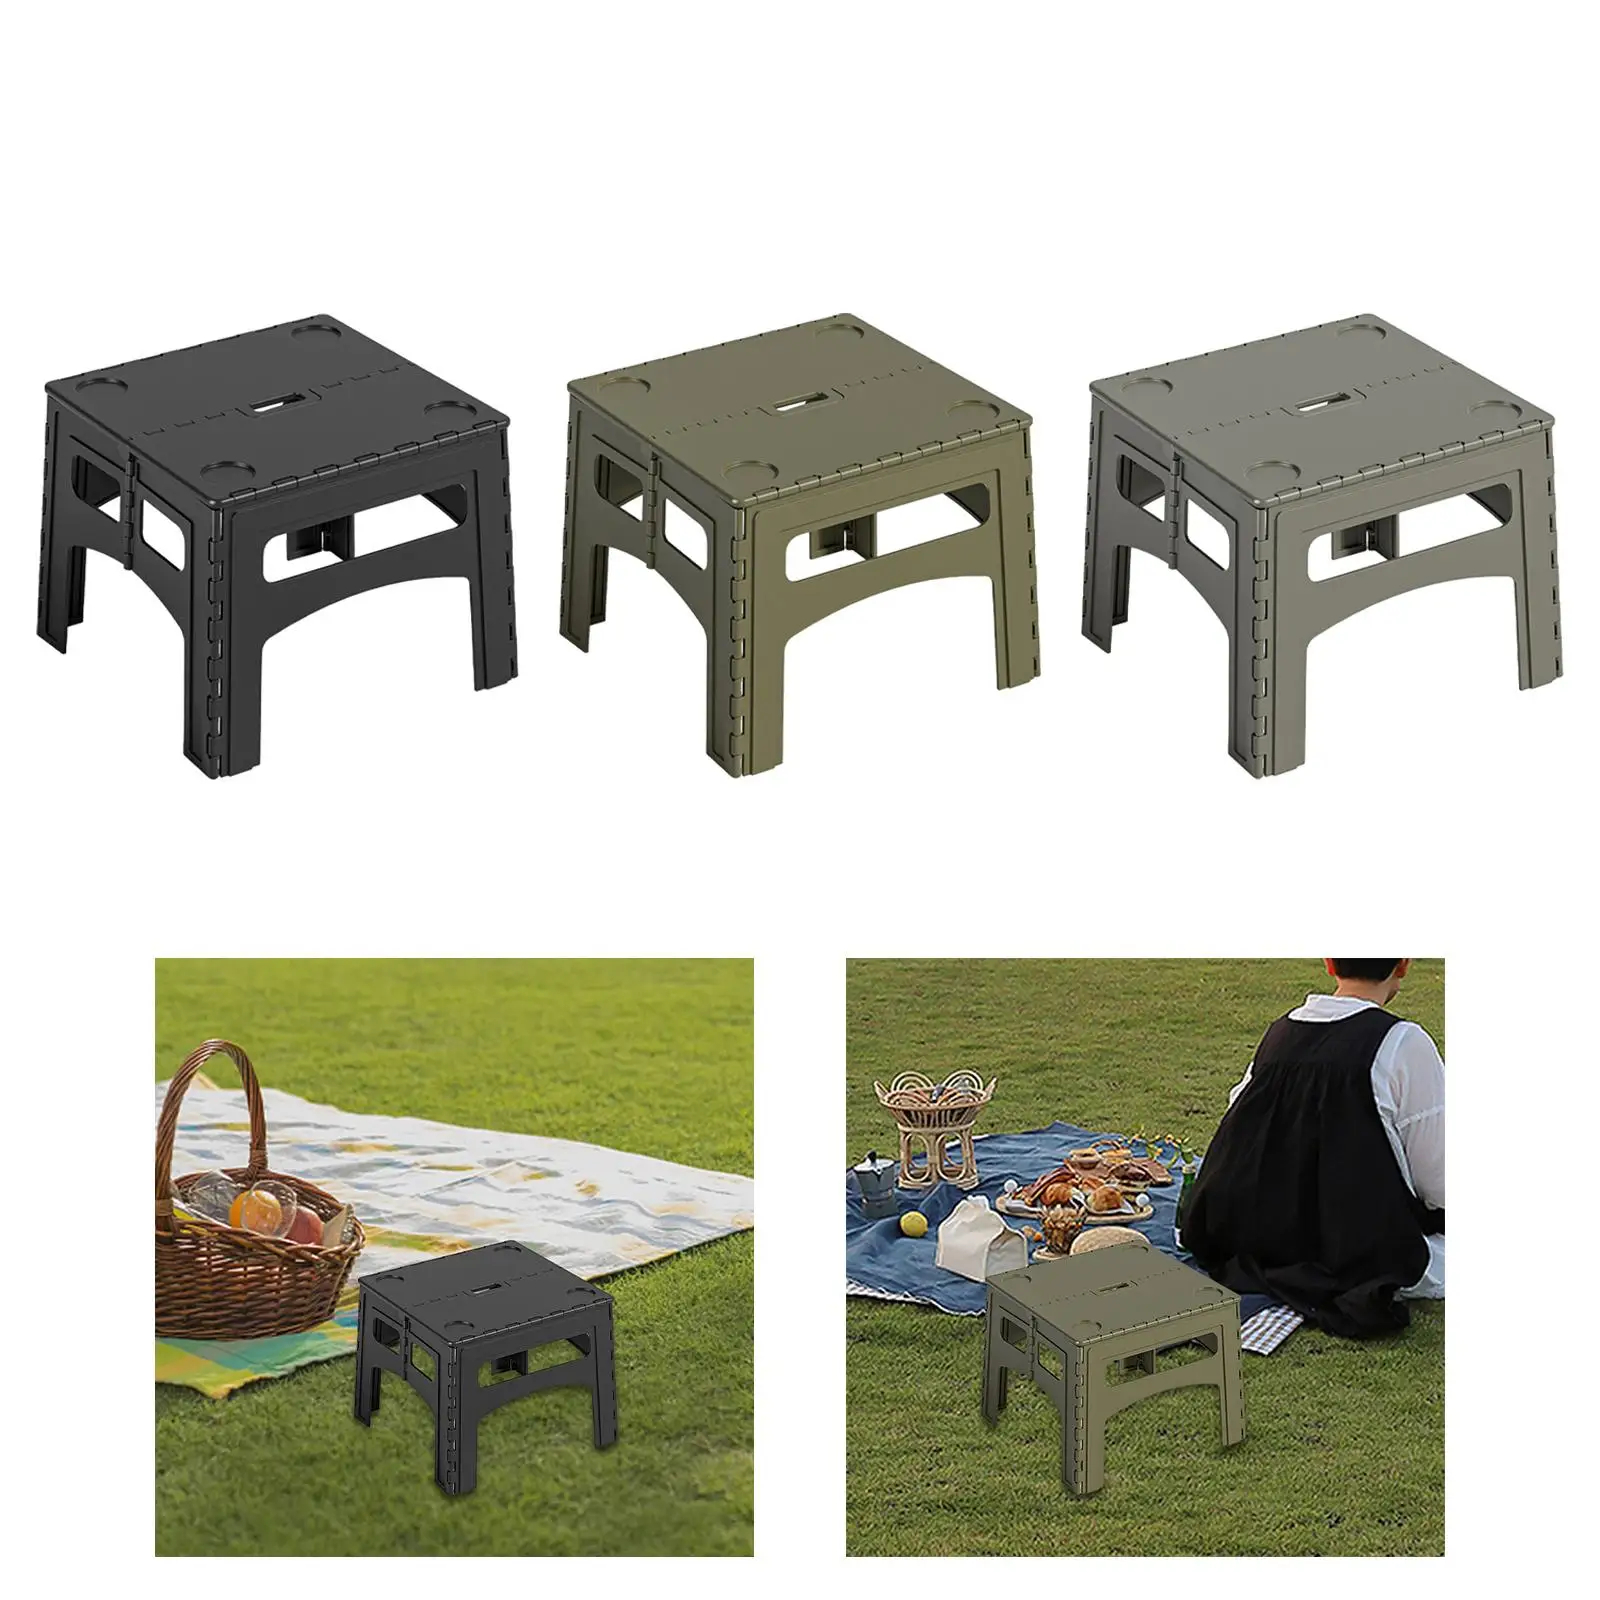 Camp Table Desk Foldable Picnic Table Portable Camping Table Outdoor Folding Table for Backyard Garden Fishing Outdoors Cooking